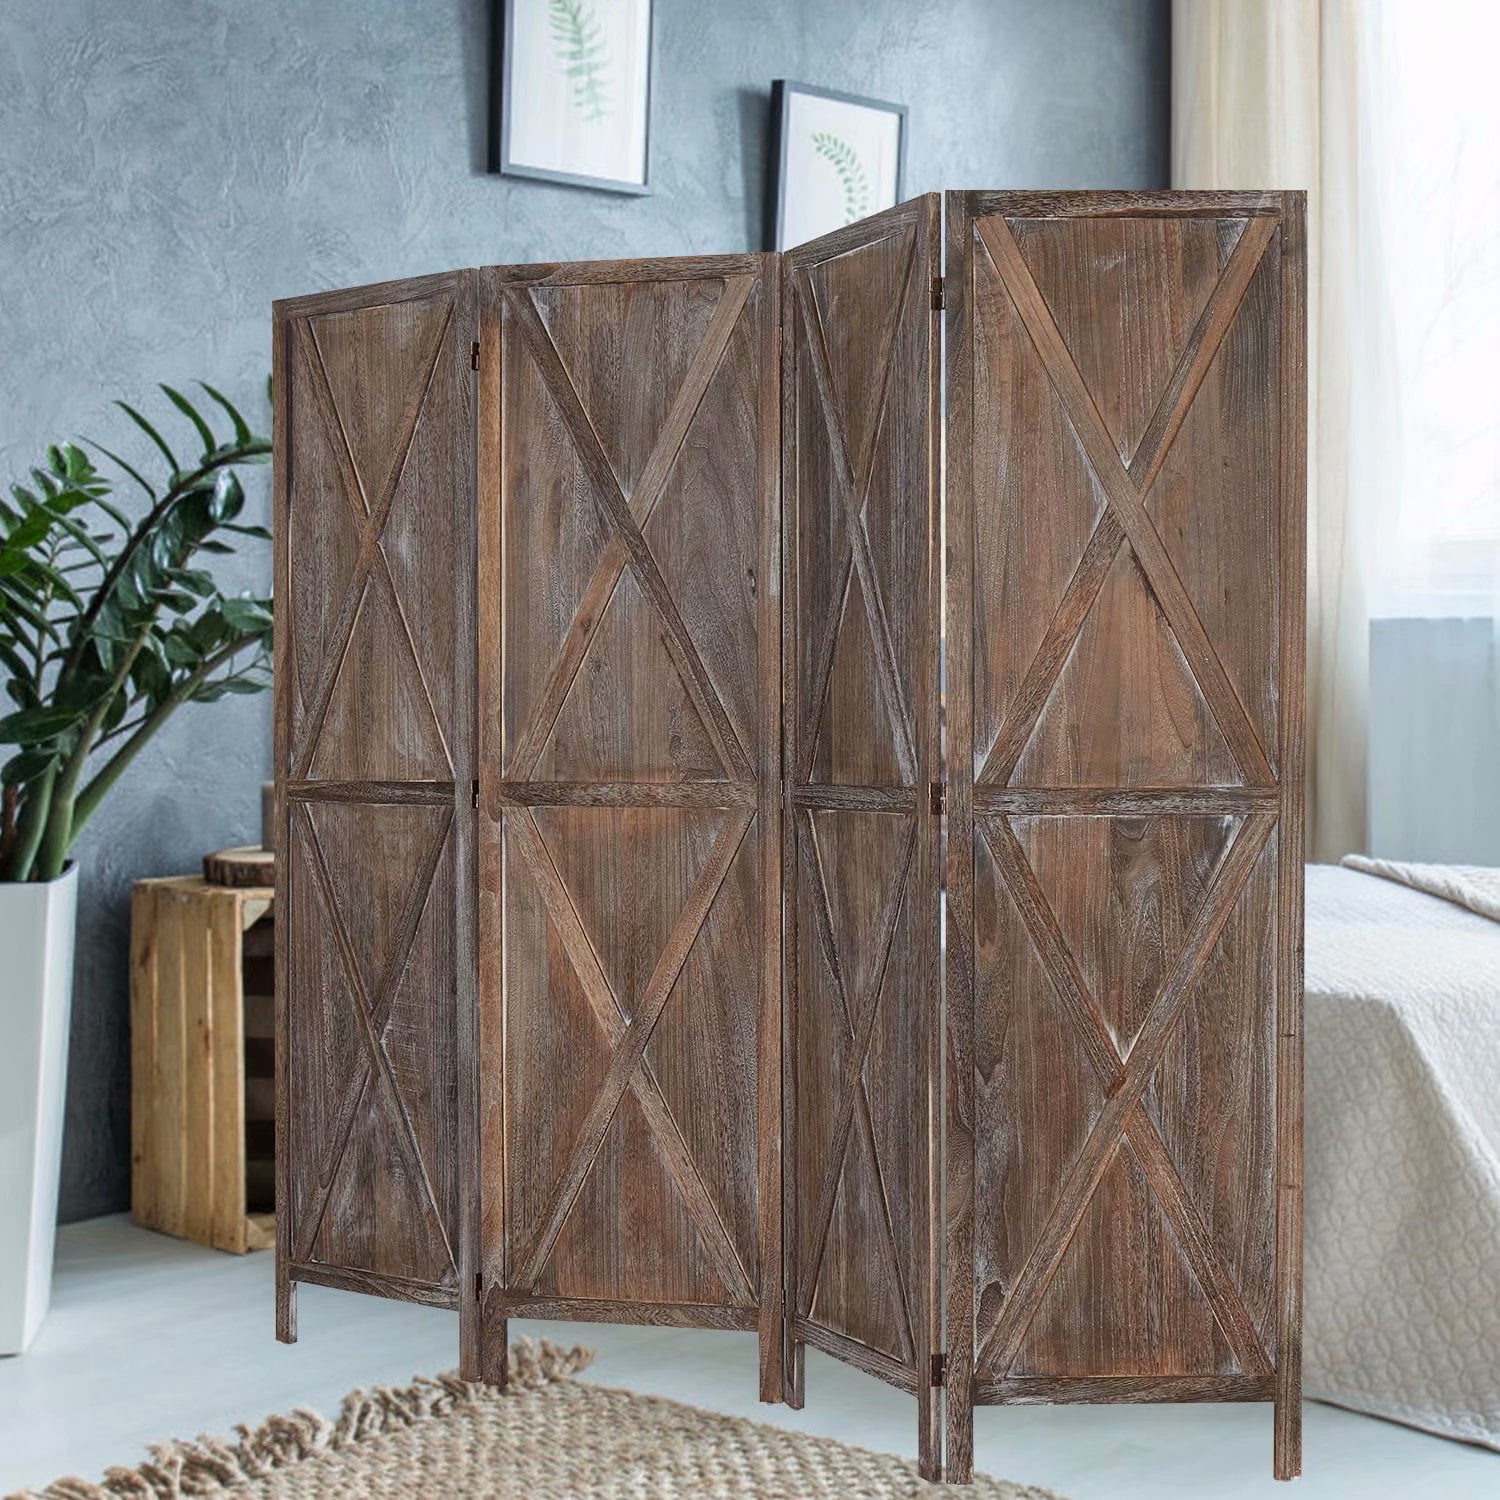 Details about   Folding Wooden Room Screen Divider With 4 Flexible Panels Easy To Move And Store 